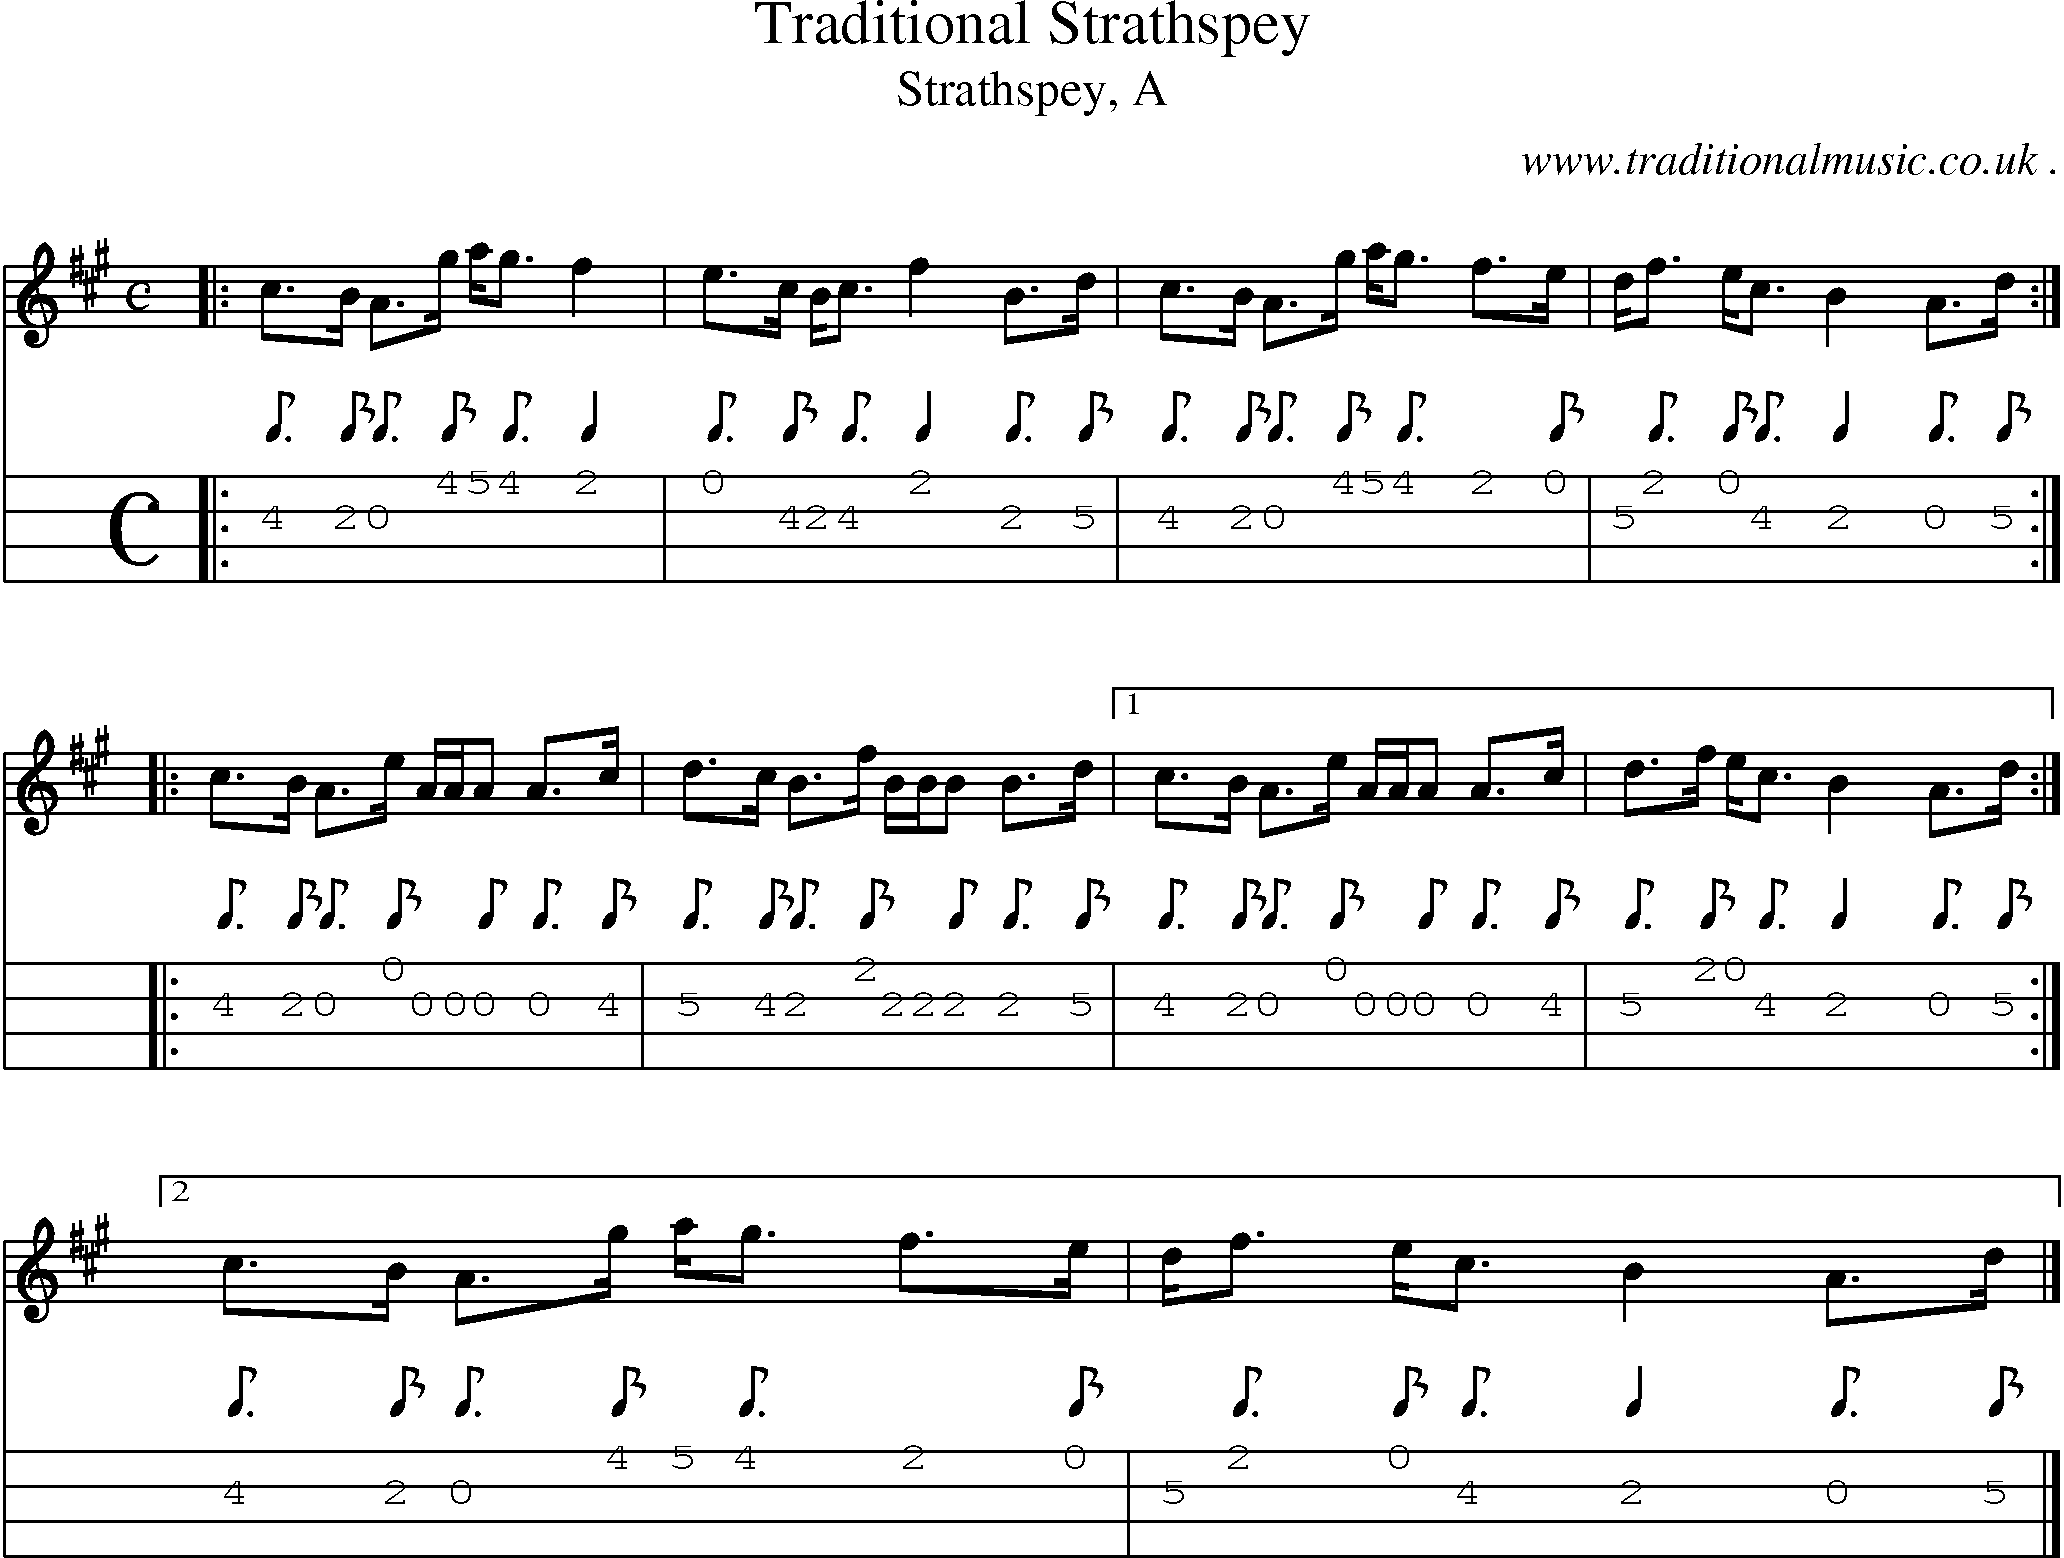 Sheet-music  score, Chords and Mandolin Tabs for Traditional Strathspey